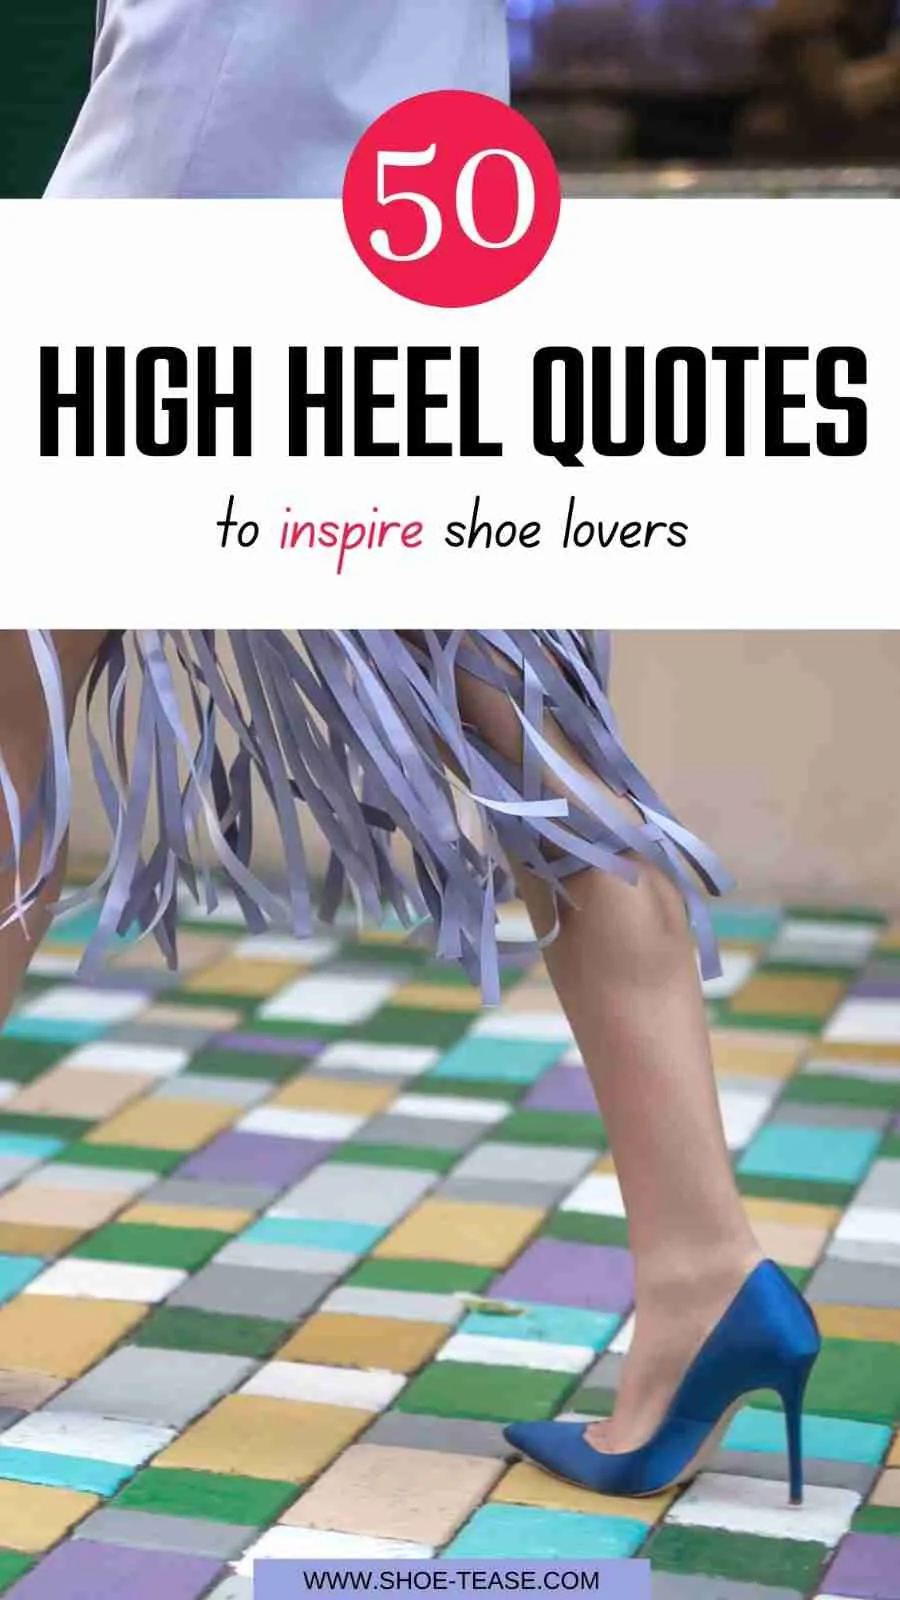 "50 High Heels Quote to inspire shoe lovers" text over image of woman walking in blue satin high heels and lavender fringe skirt.